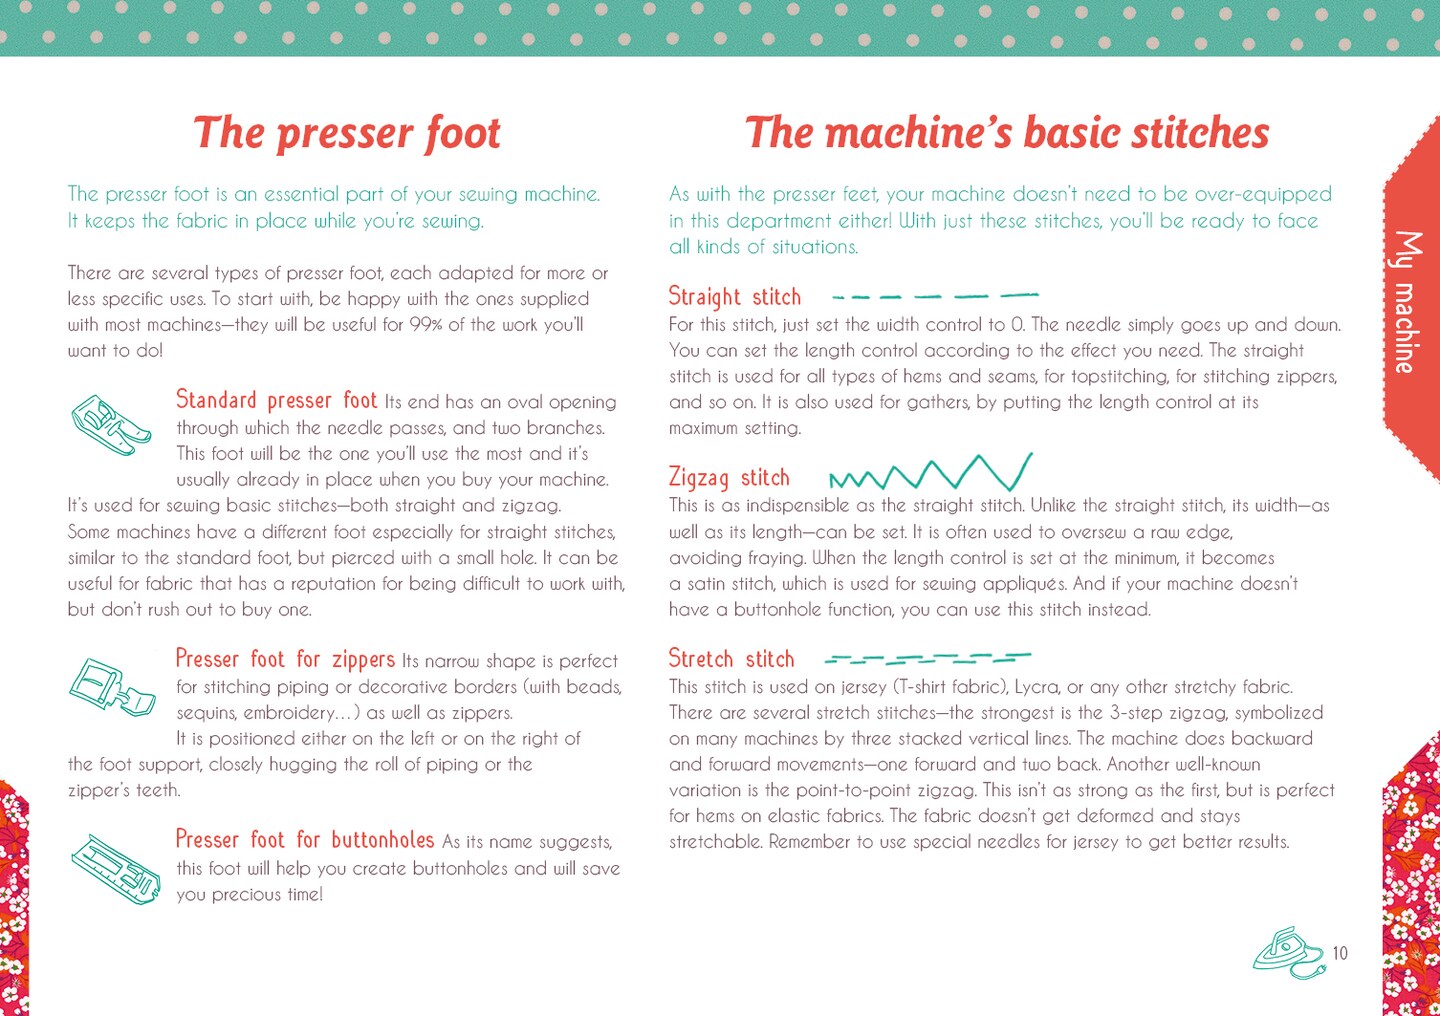 The Little Guide to Mastering Your Sewing Machine: All the Sewing Basics, Plus 15 Step-by-Step Projects